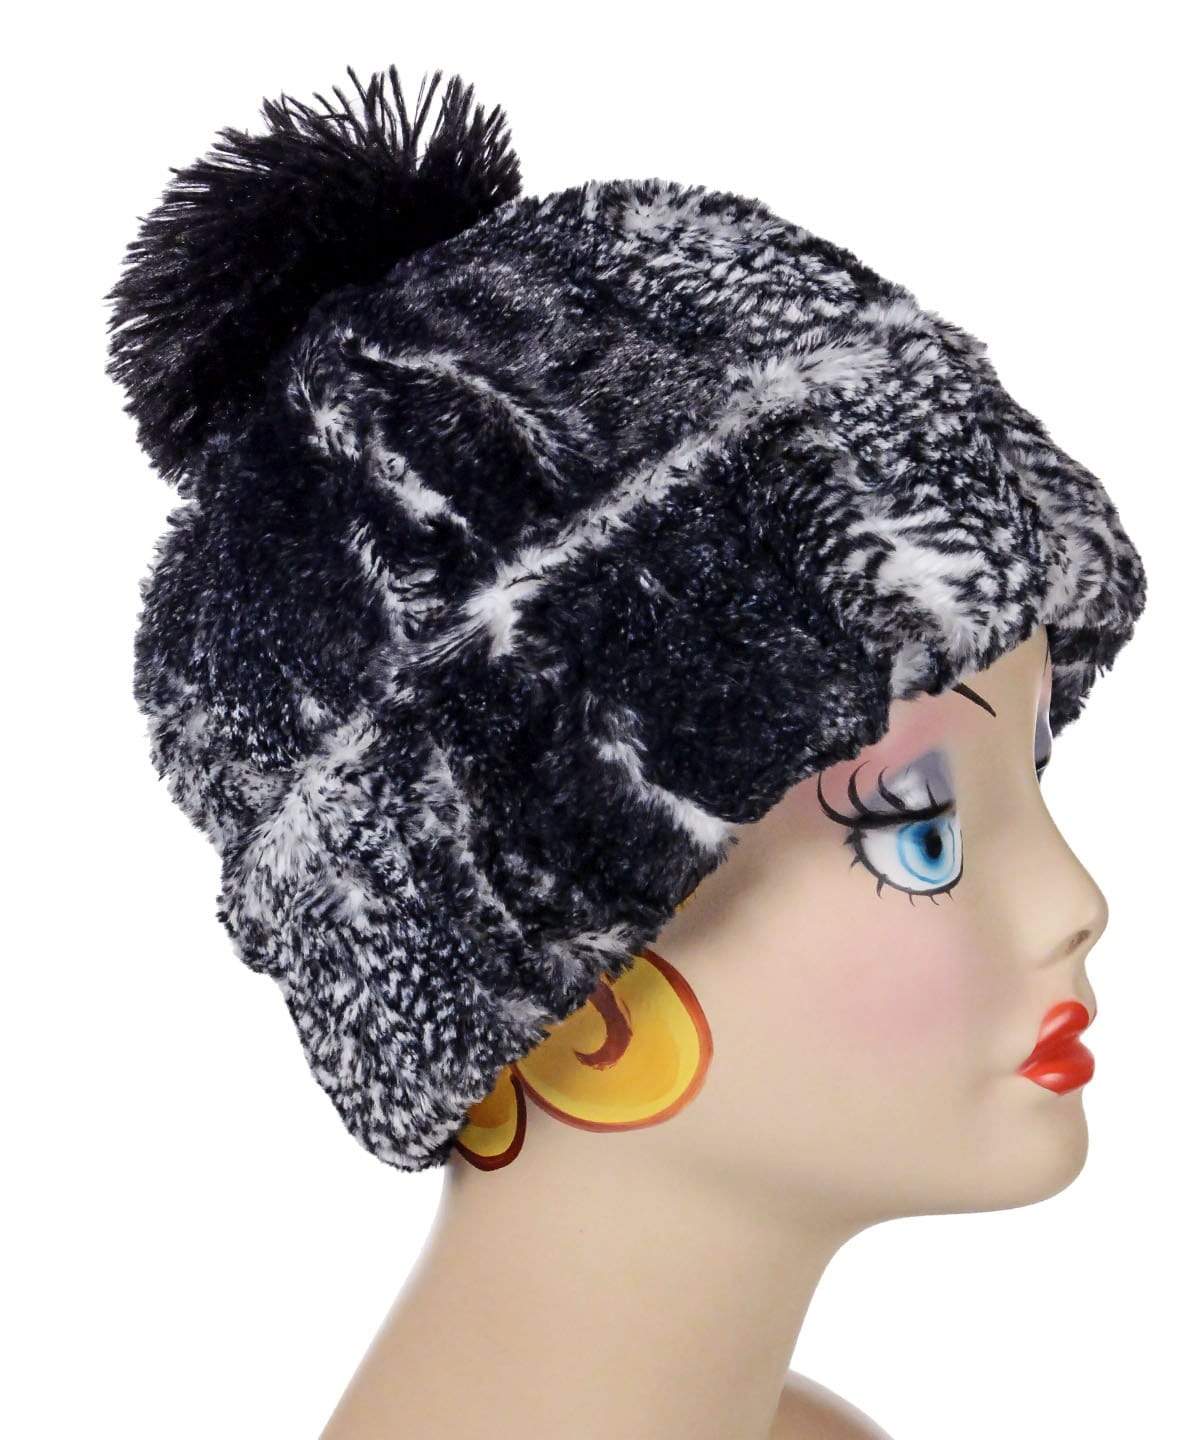 Beanie Hat reversible in Black Mamba and Cuddly Black Faux Fur. Handmade by Pandemonium Millinery in Seattle, WA.